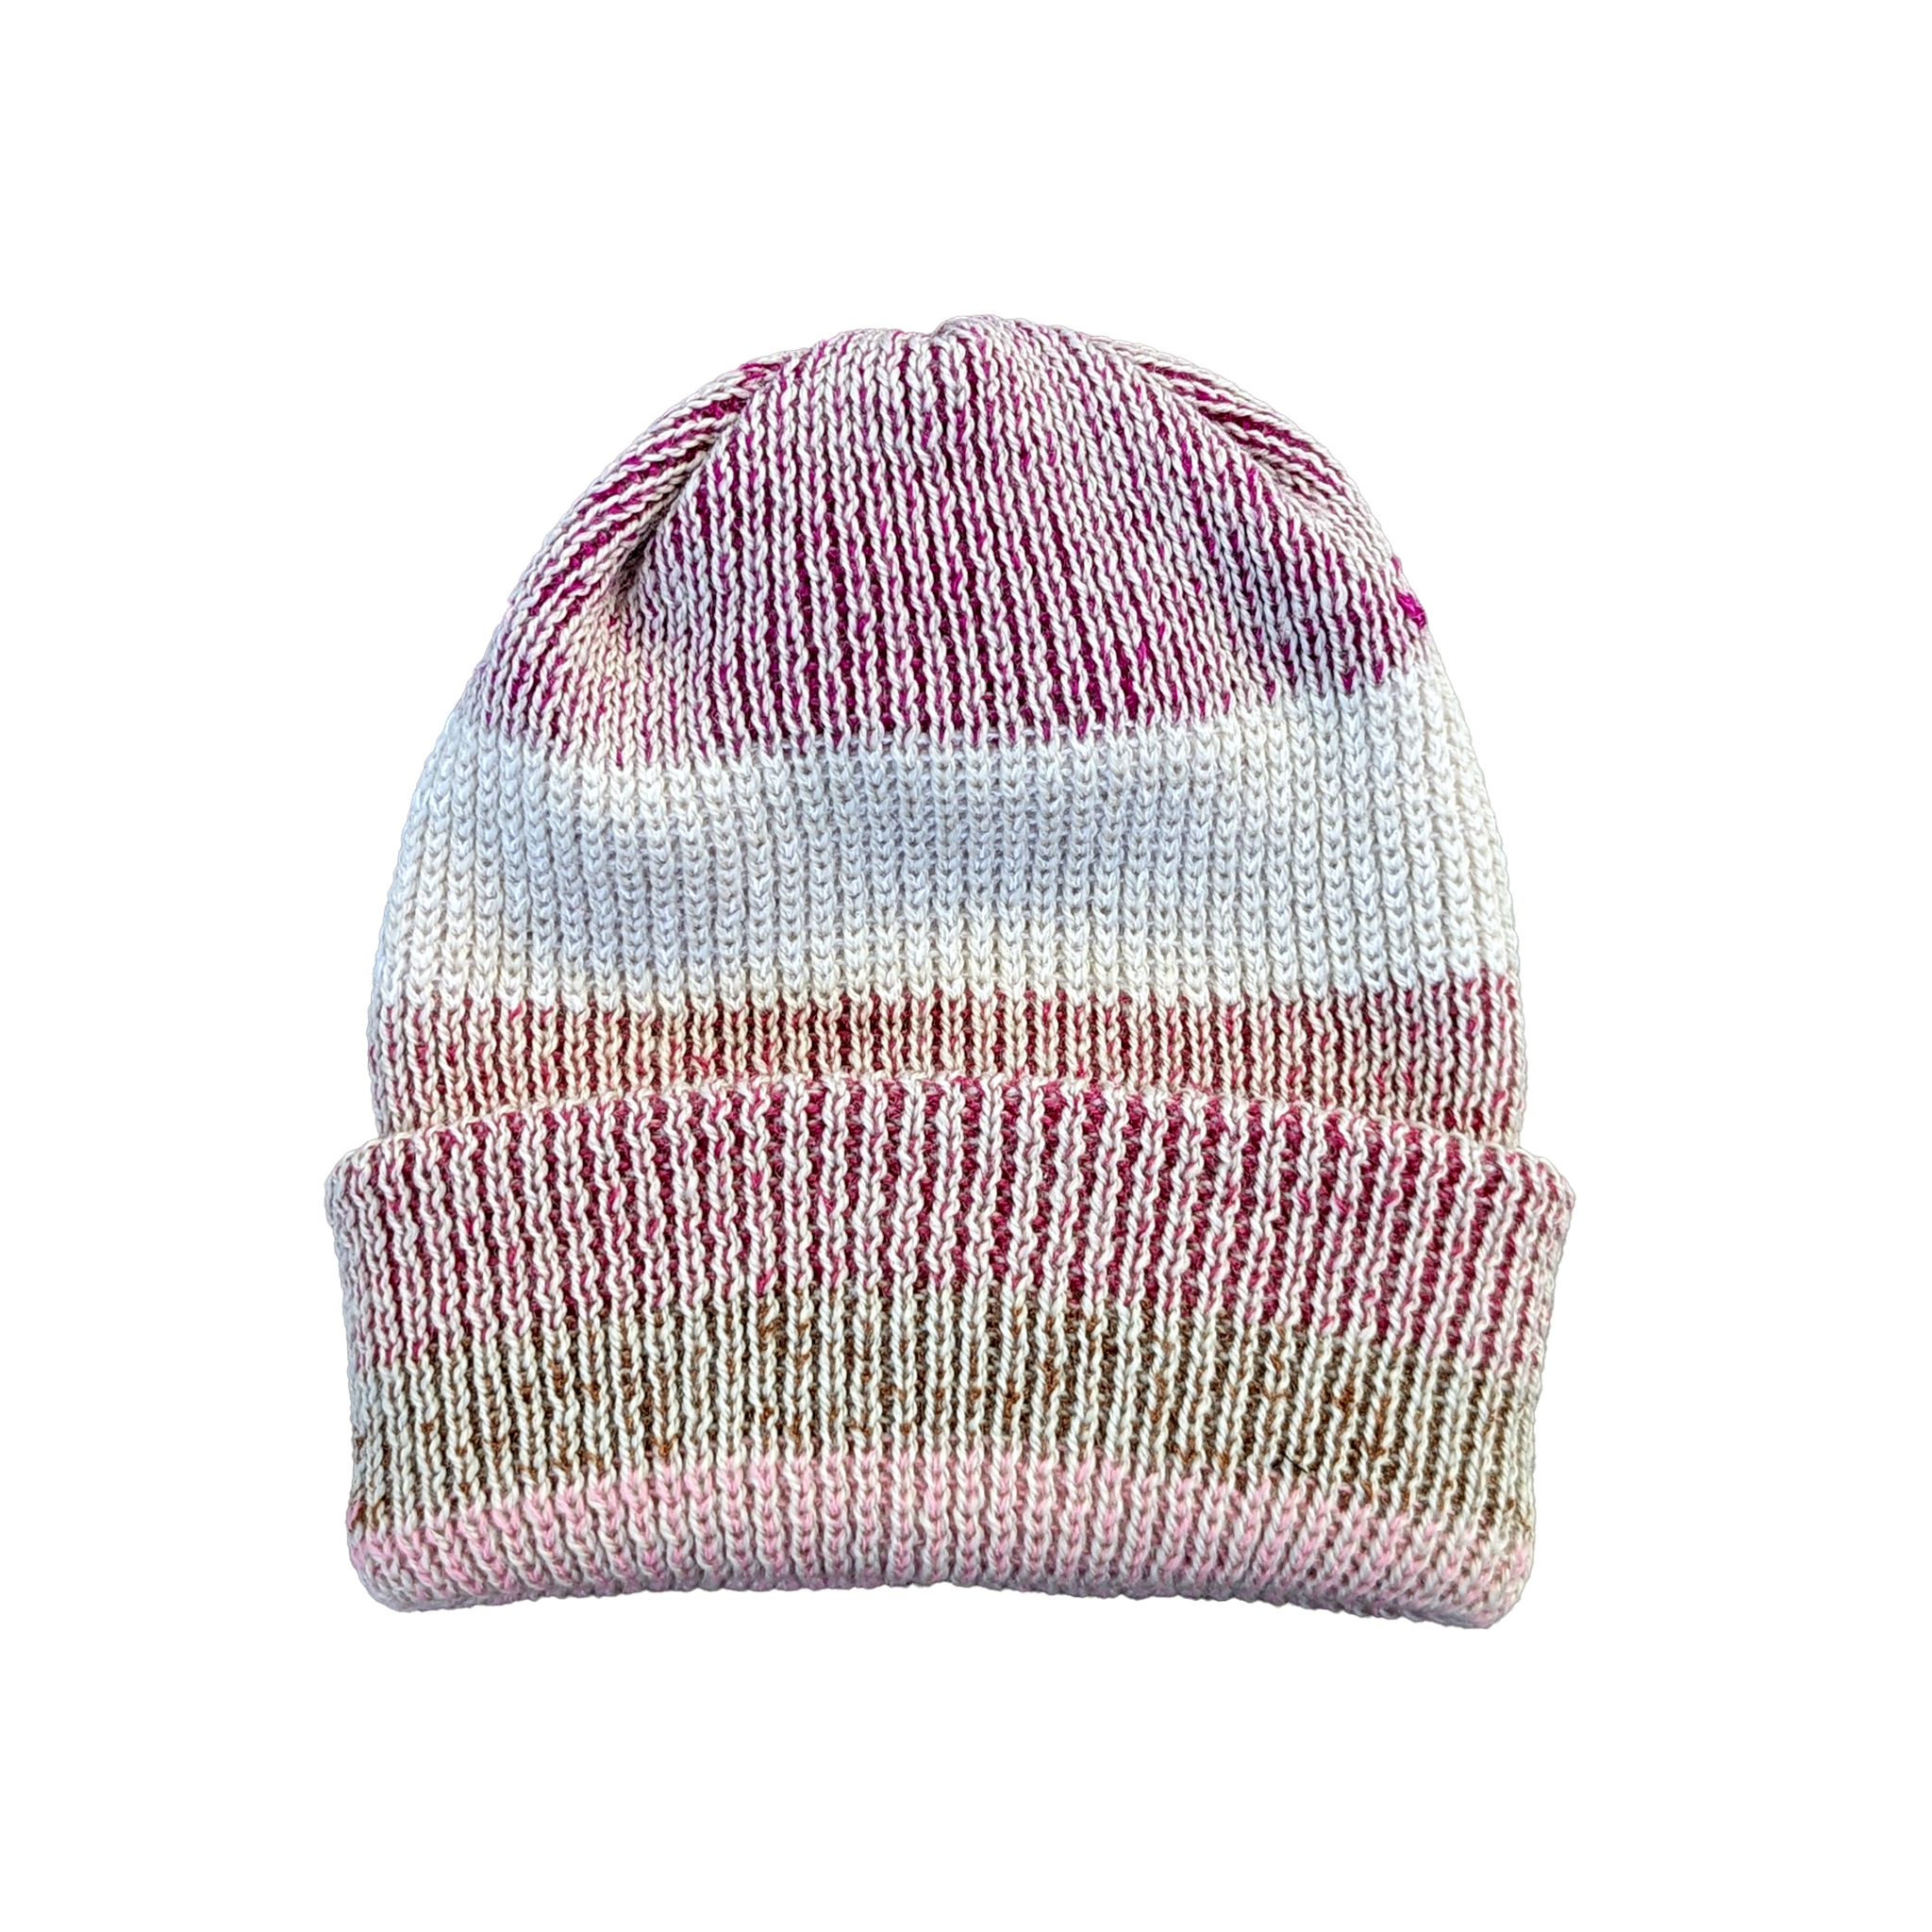 Zoe May Classic Beanie Vintage Blend